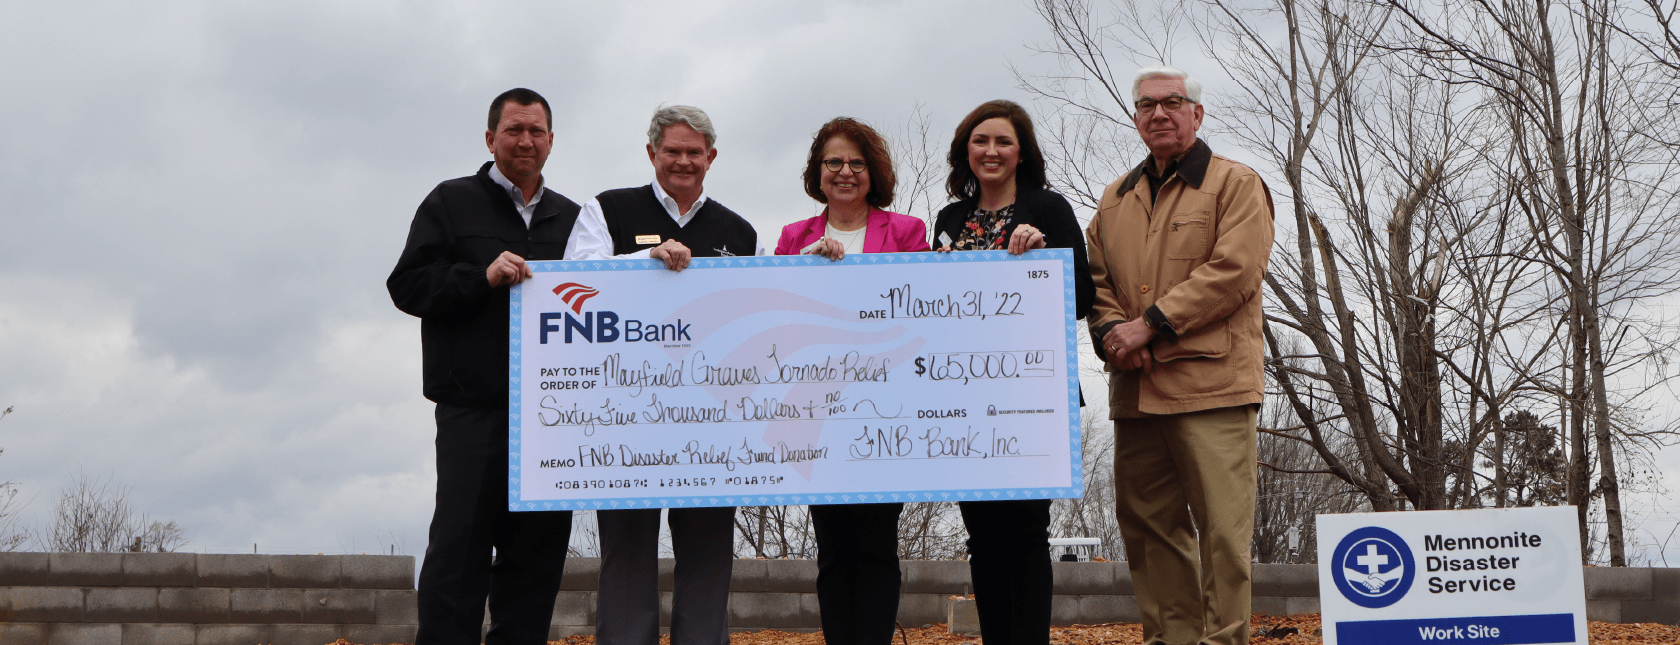 FNB Presents Check for $65,000 to Mayfield Graves County Tornado Relief Fund